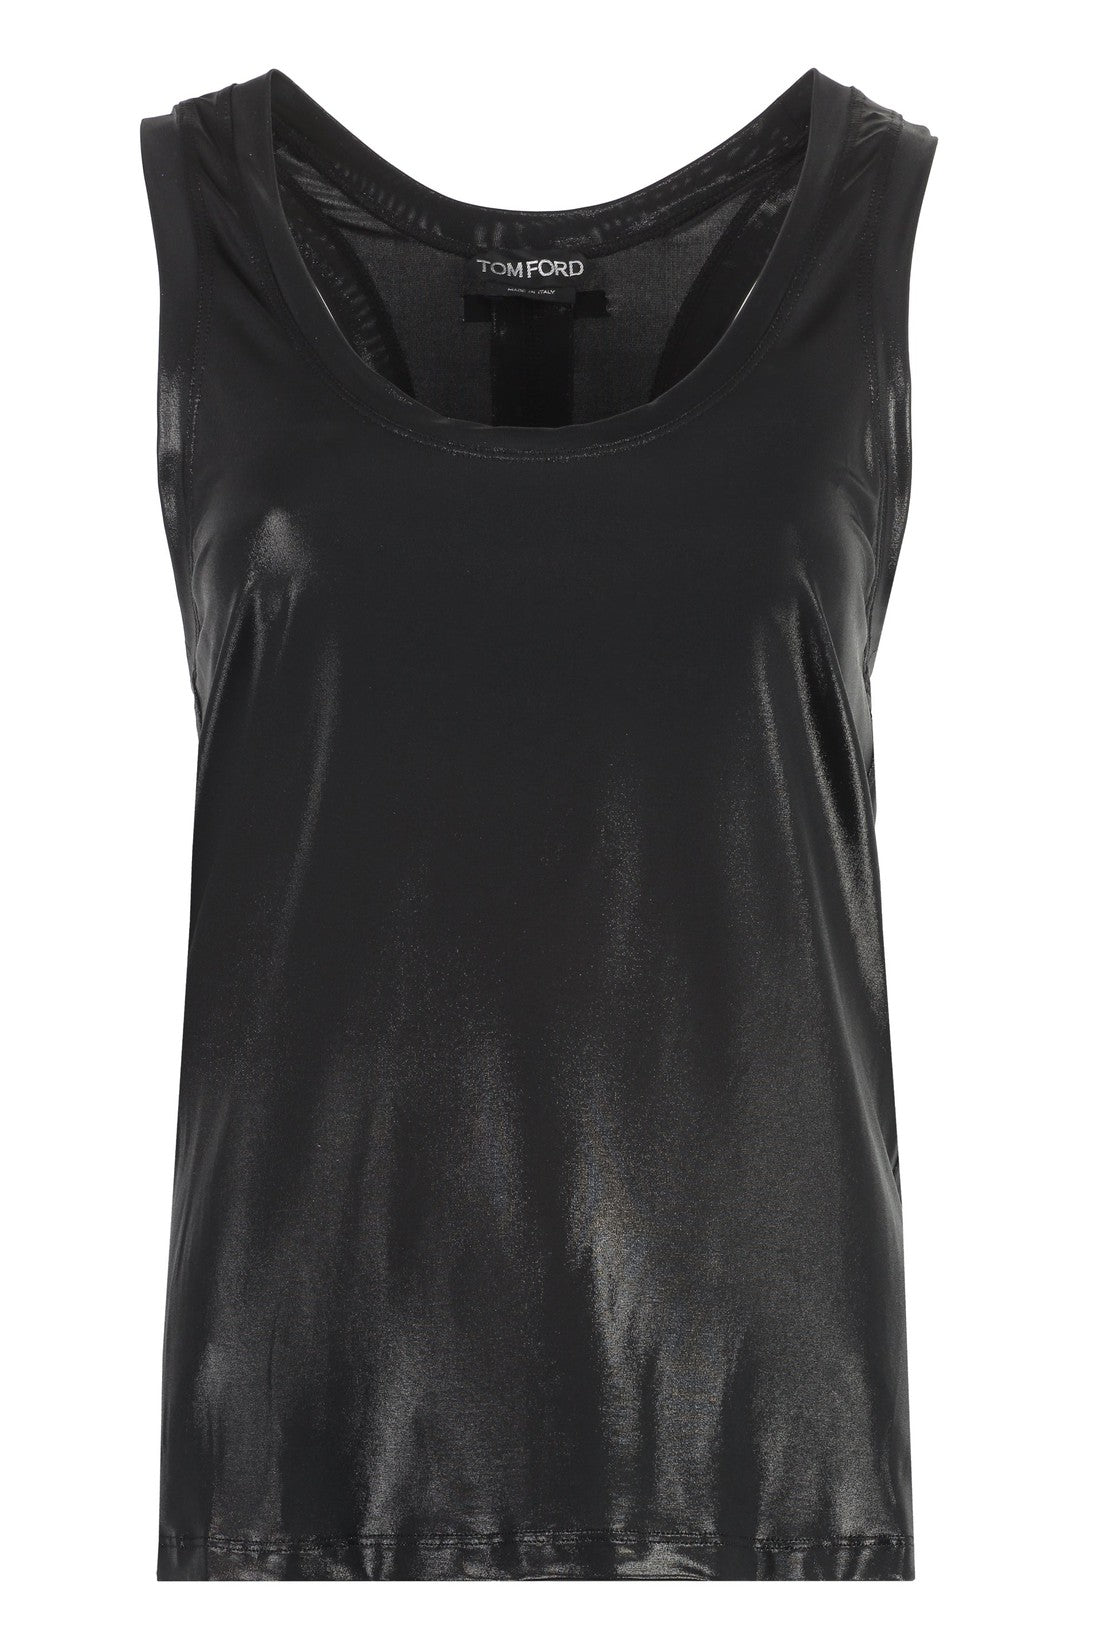 Tom Ford-OUTLET-SALE-Viscose tank top-ARCHIVIST